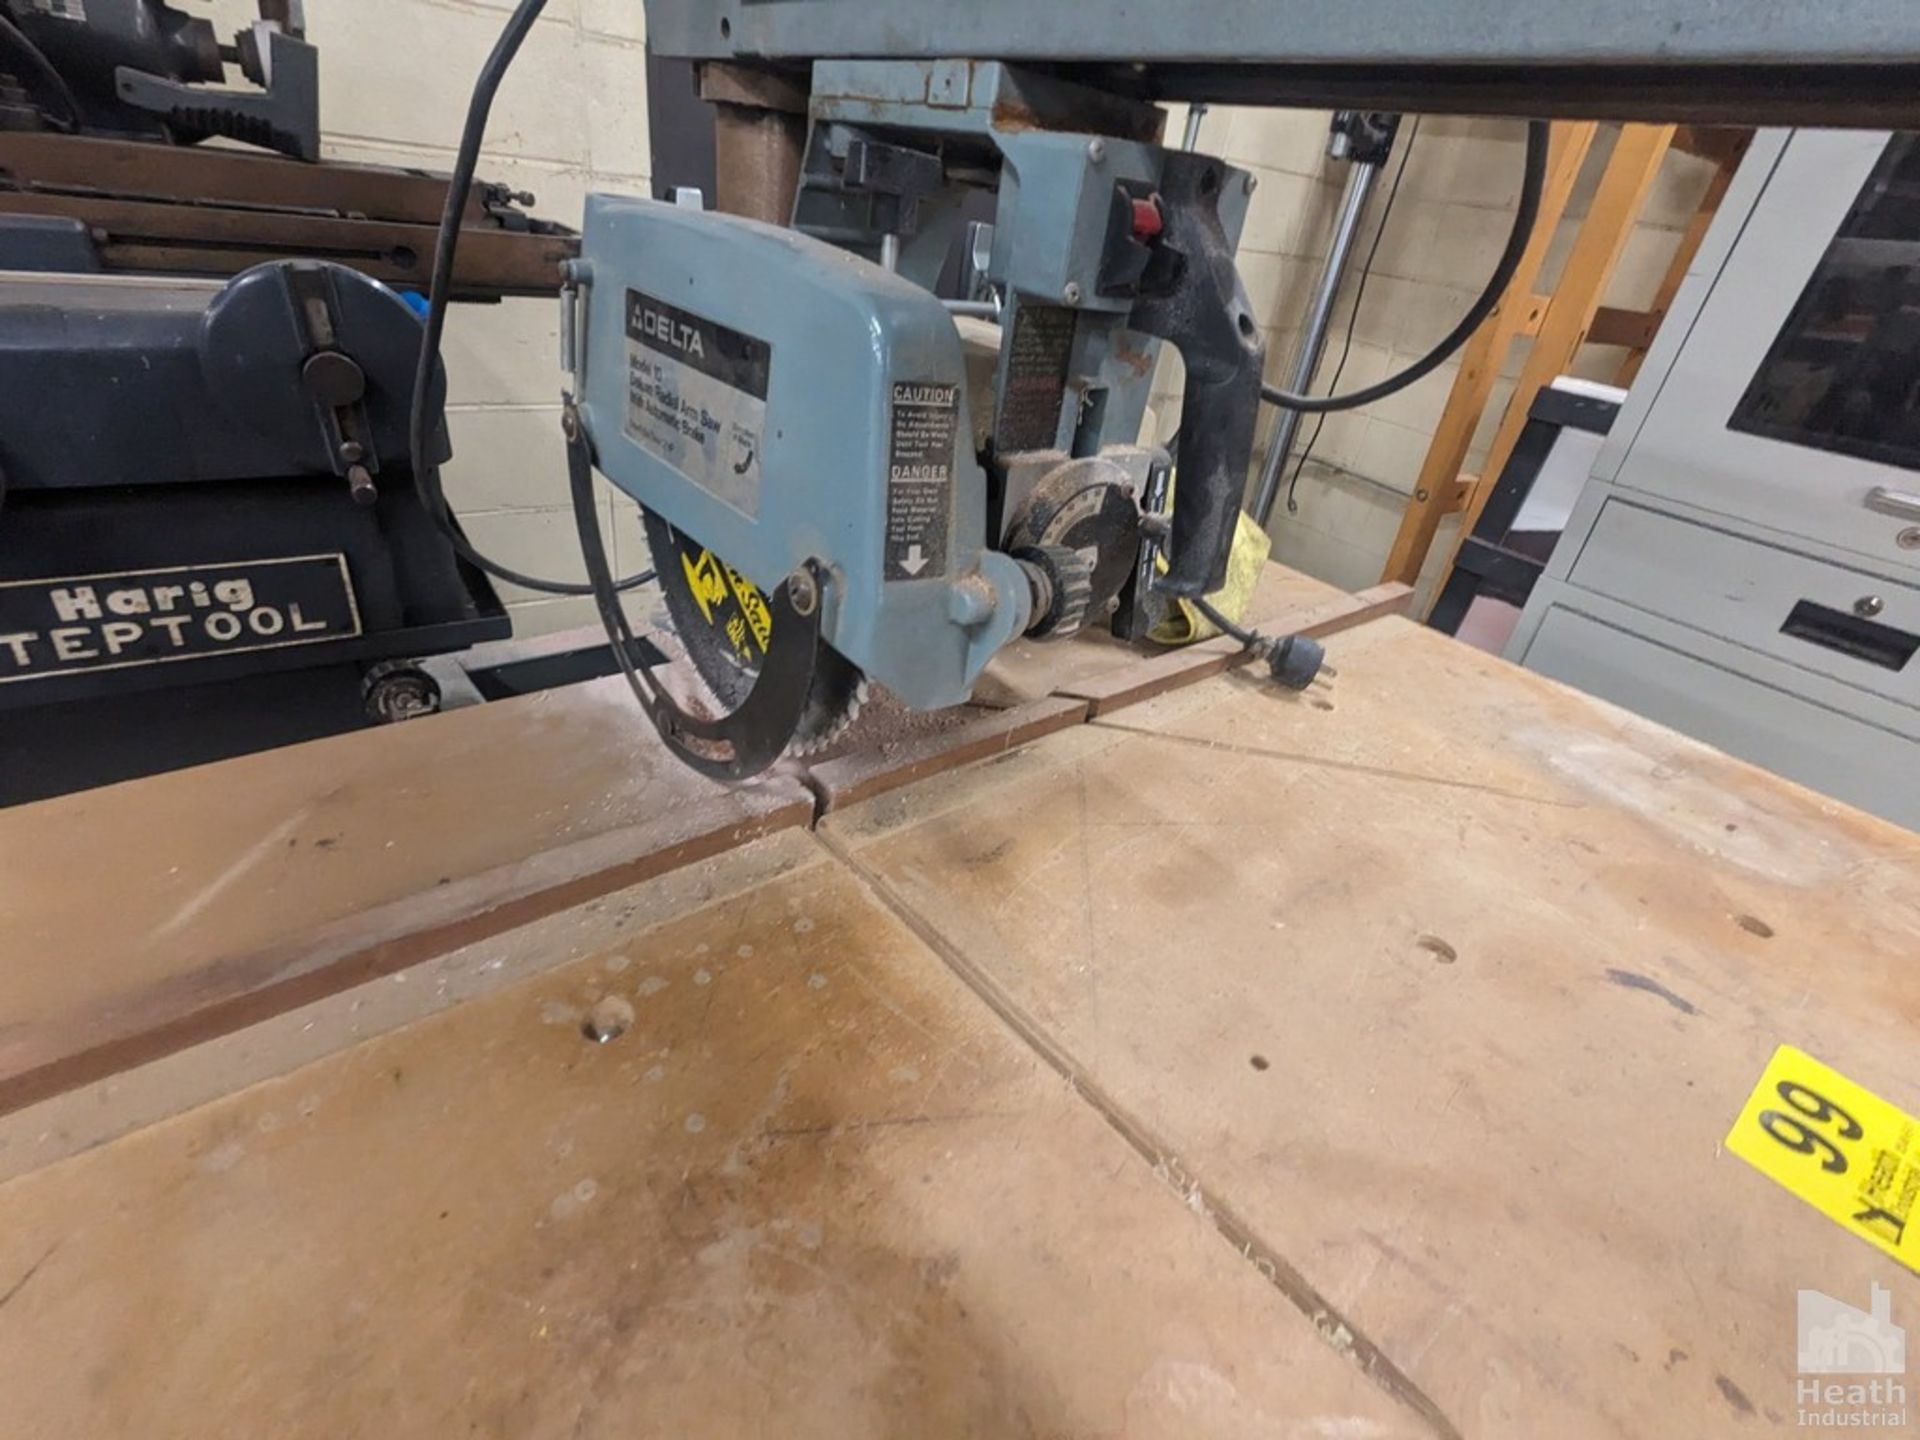 DELTA MODEL 10 DELUXE RADIAL ARM SAW WITH AUTOMATIC BRAKE Loading Fee :$100 - Image 3 of 3